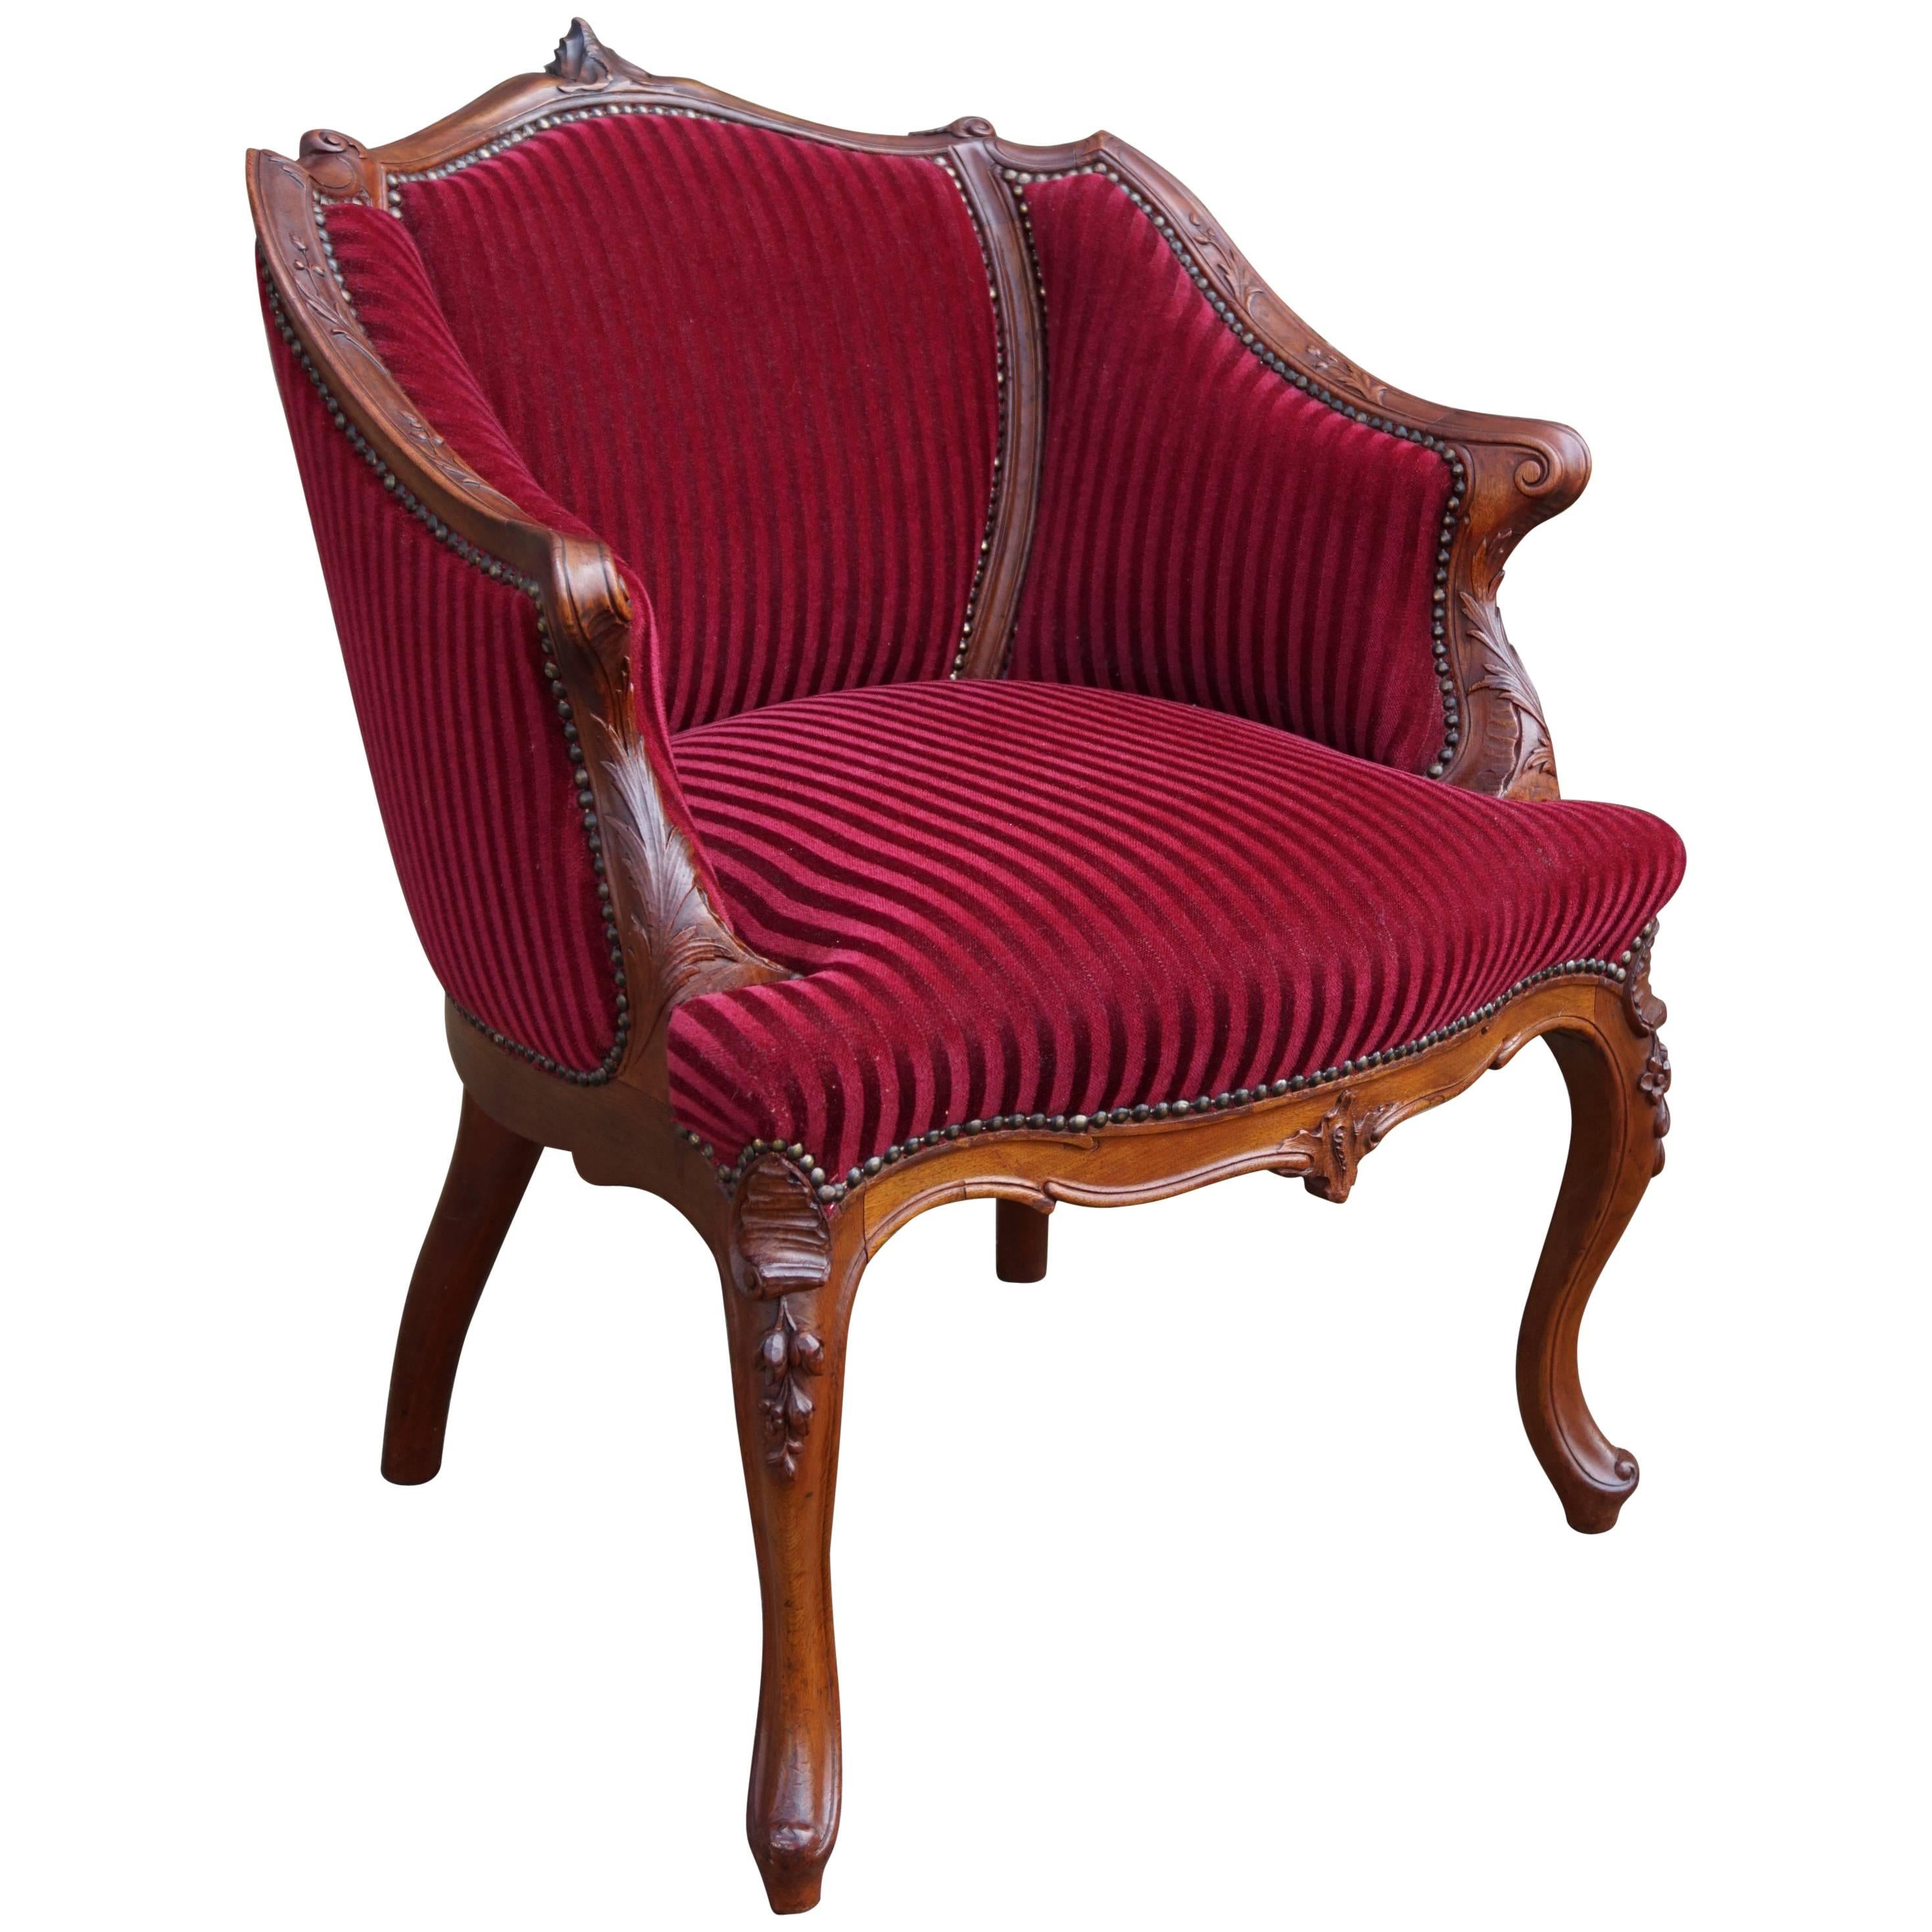 Antique and Stunning 19th Century Hand-Carved Mahogany and Red Velour Chair